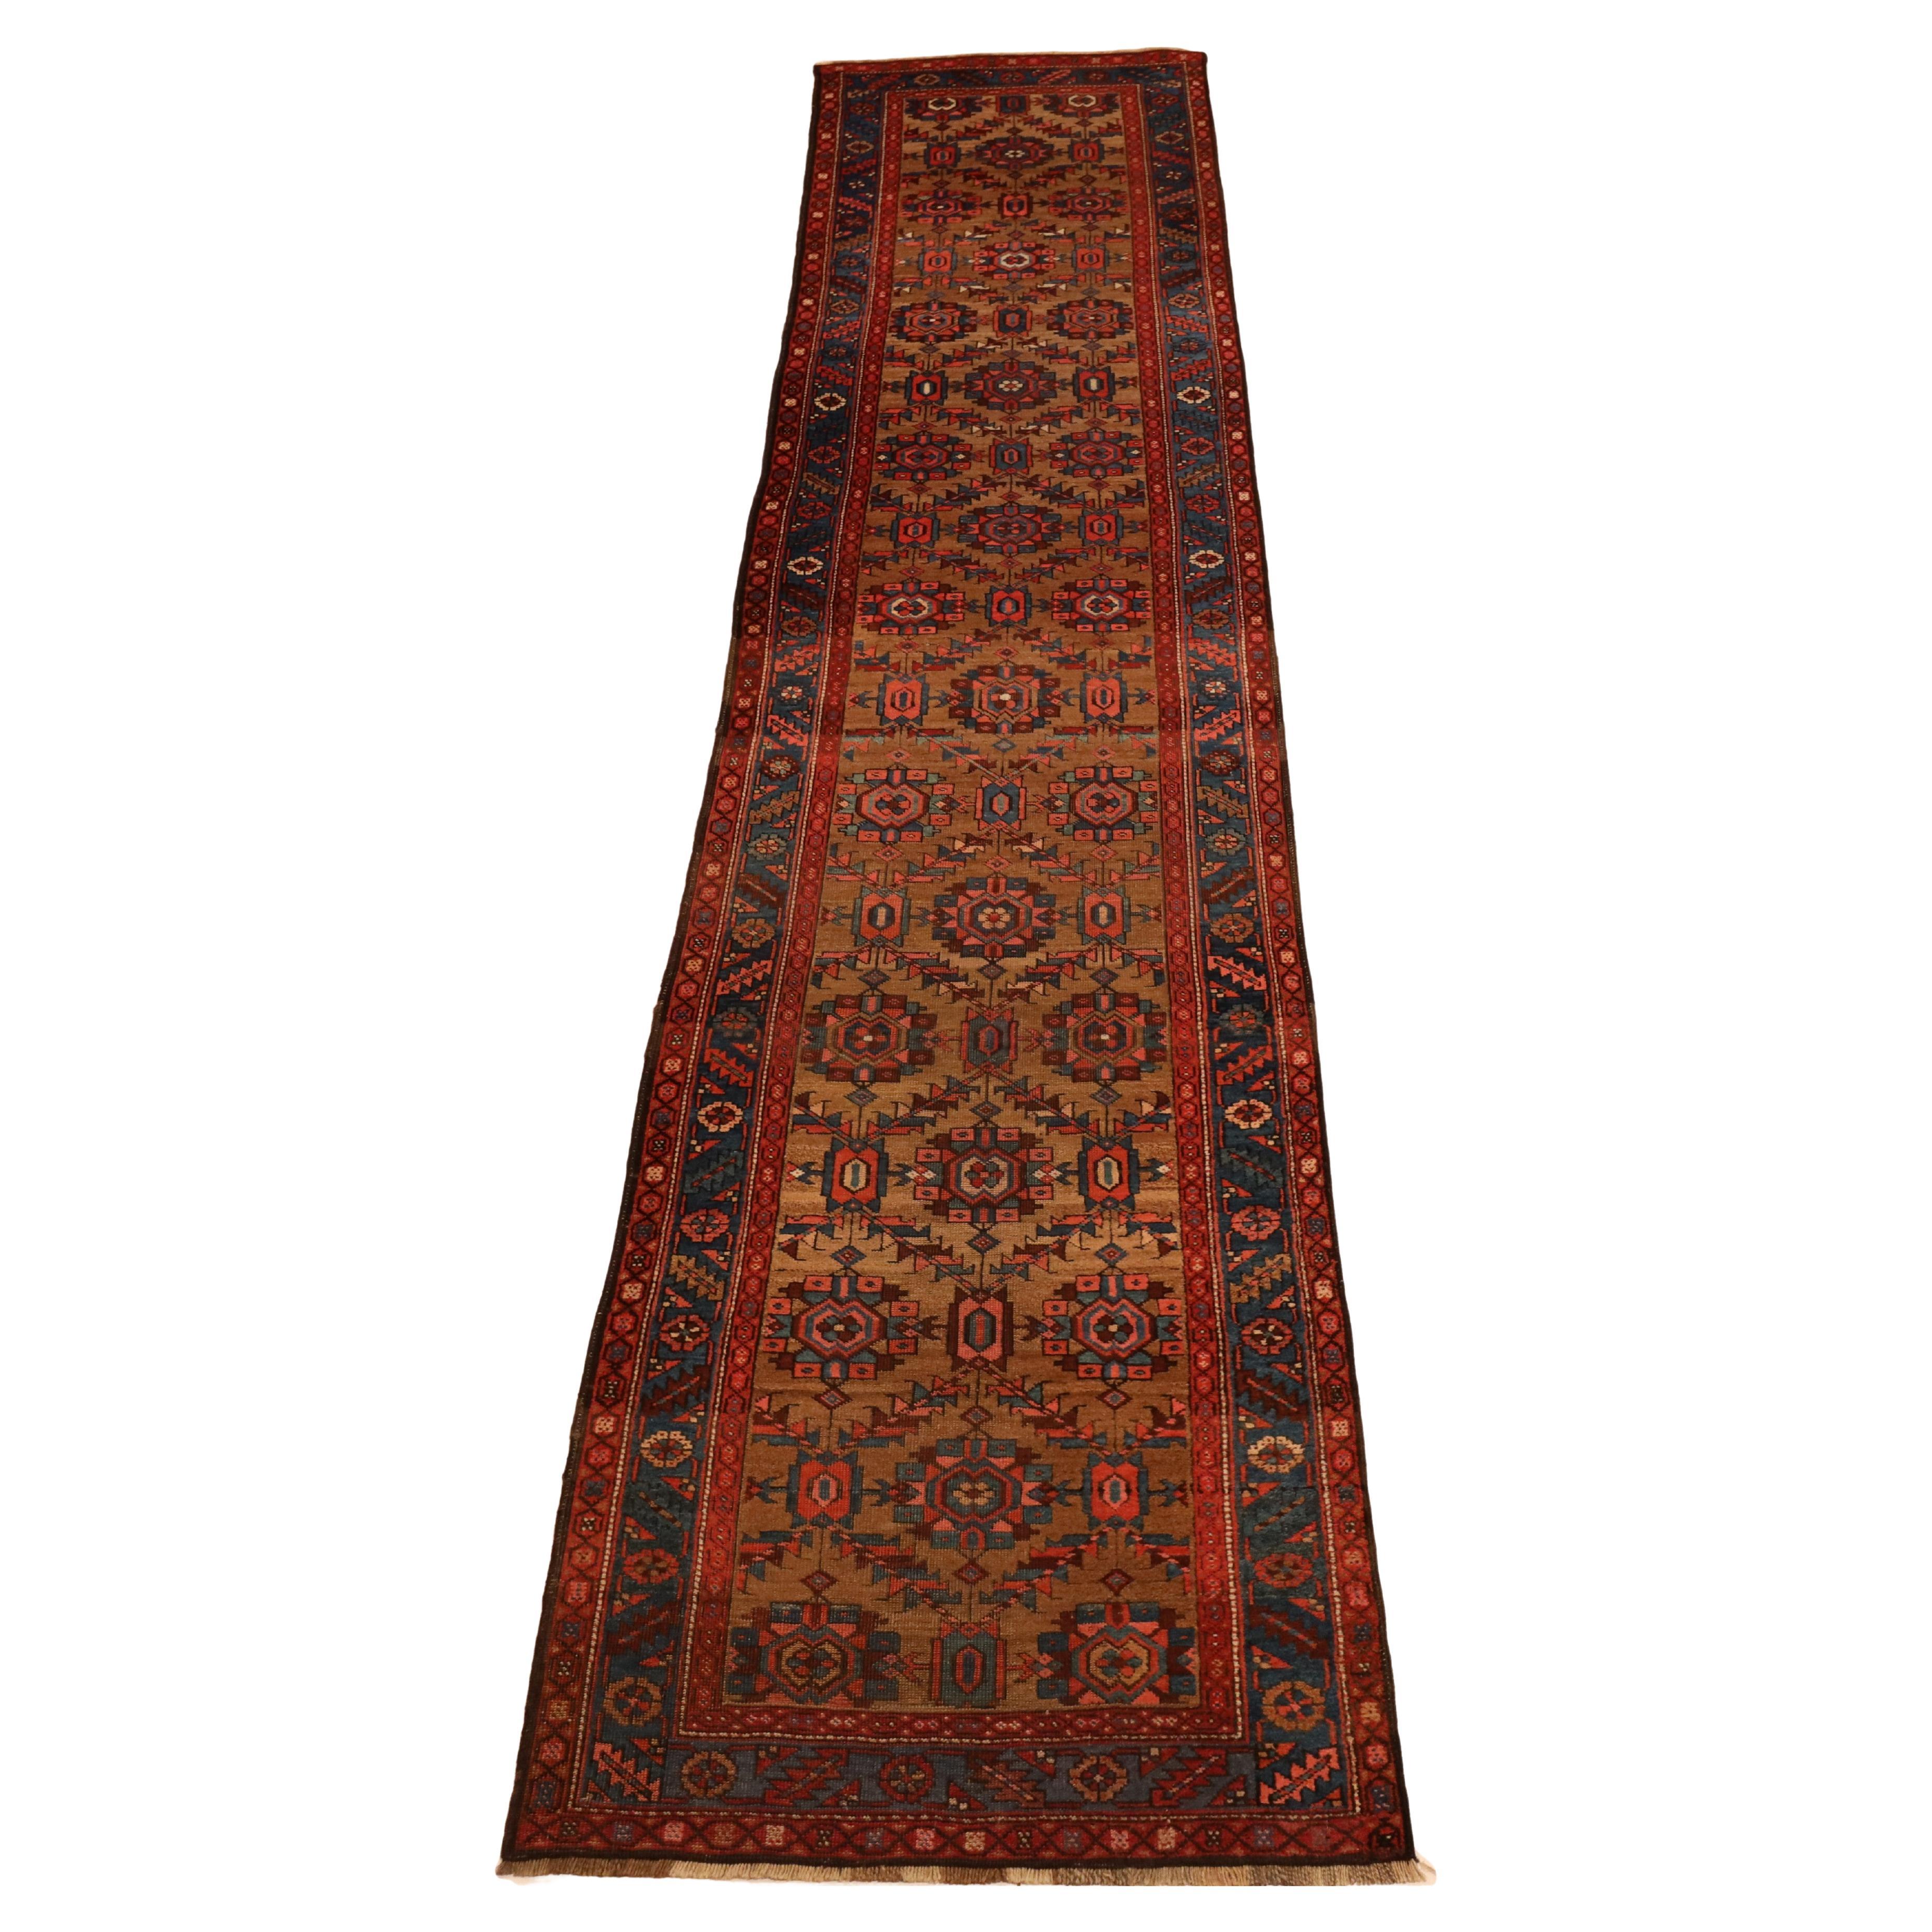 North-West Persian Vintage Runner - 3'1" x 13'8" For Sale